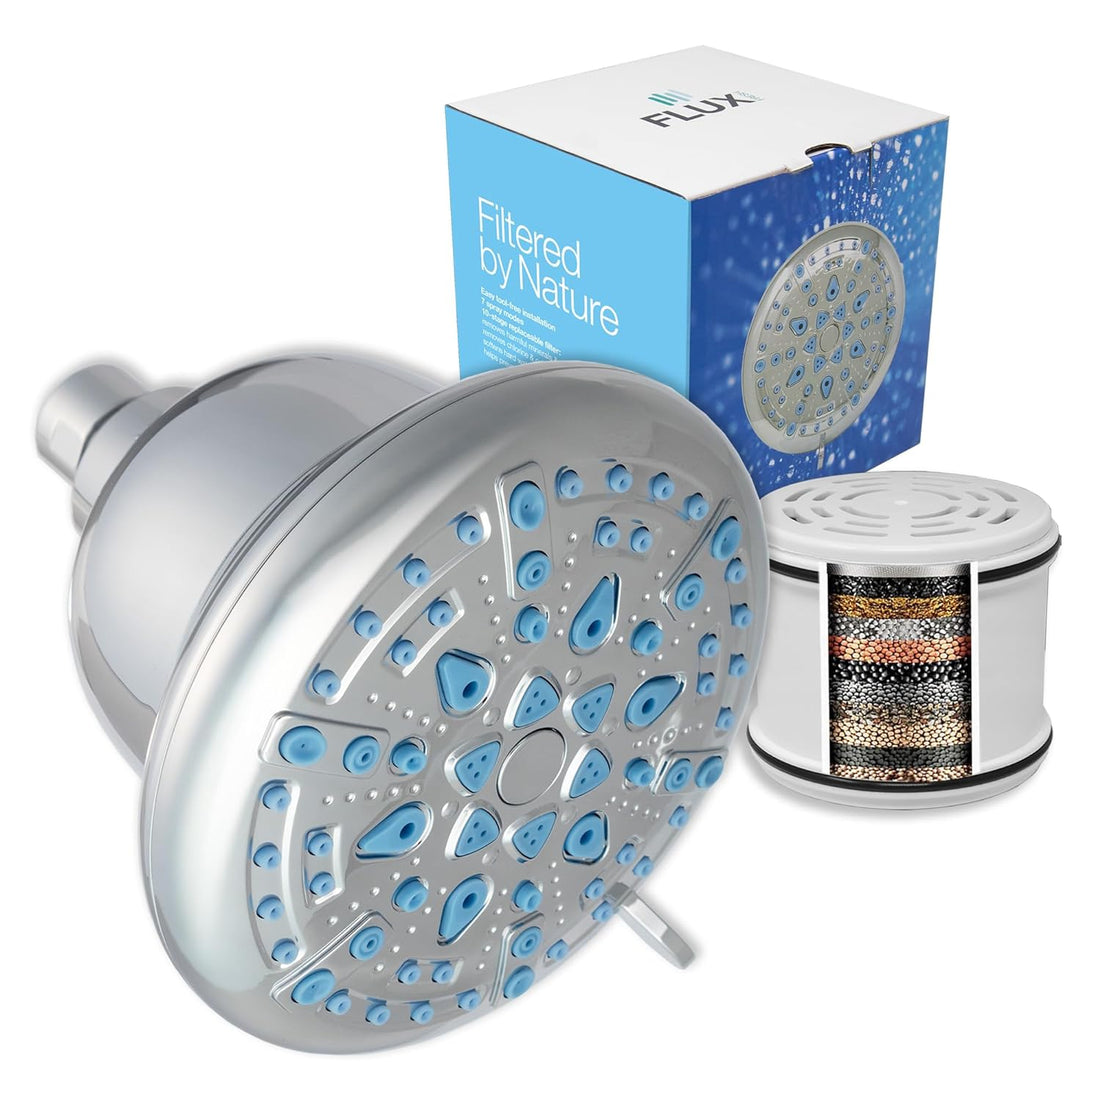 Flux Fresh Fixed Filtered Shower Head with 7 Spray Settings and 10-stage Replaceable Purifying and Softening Filter